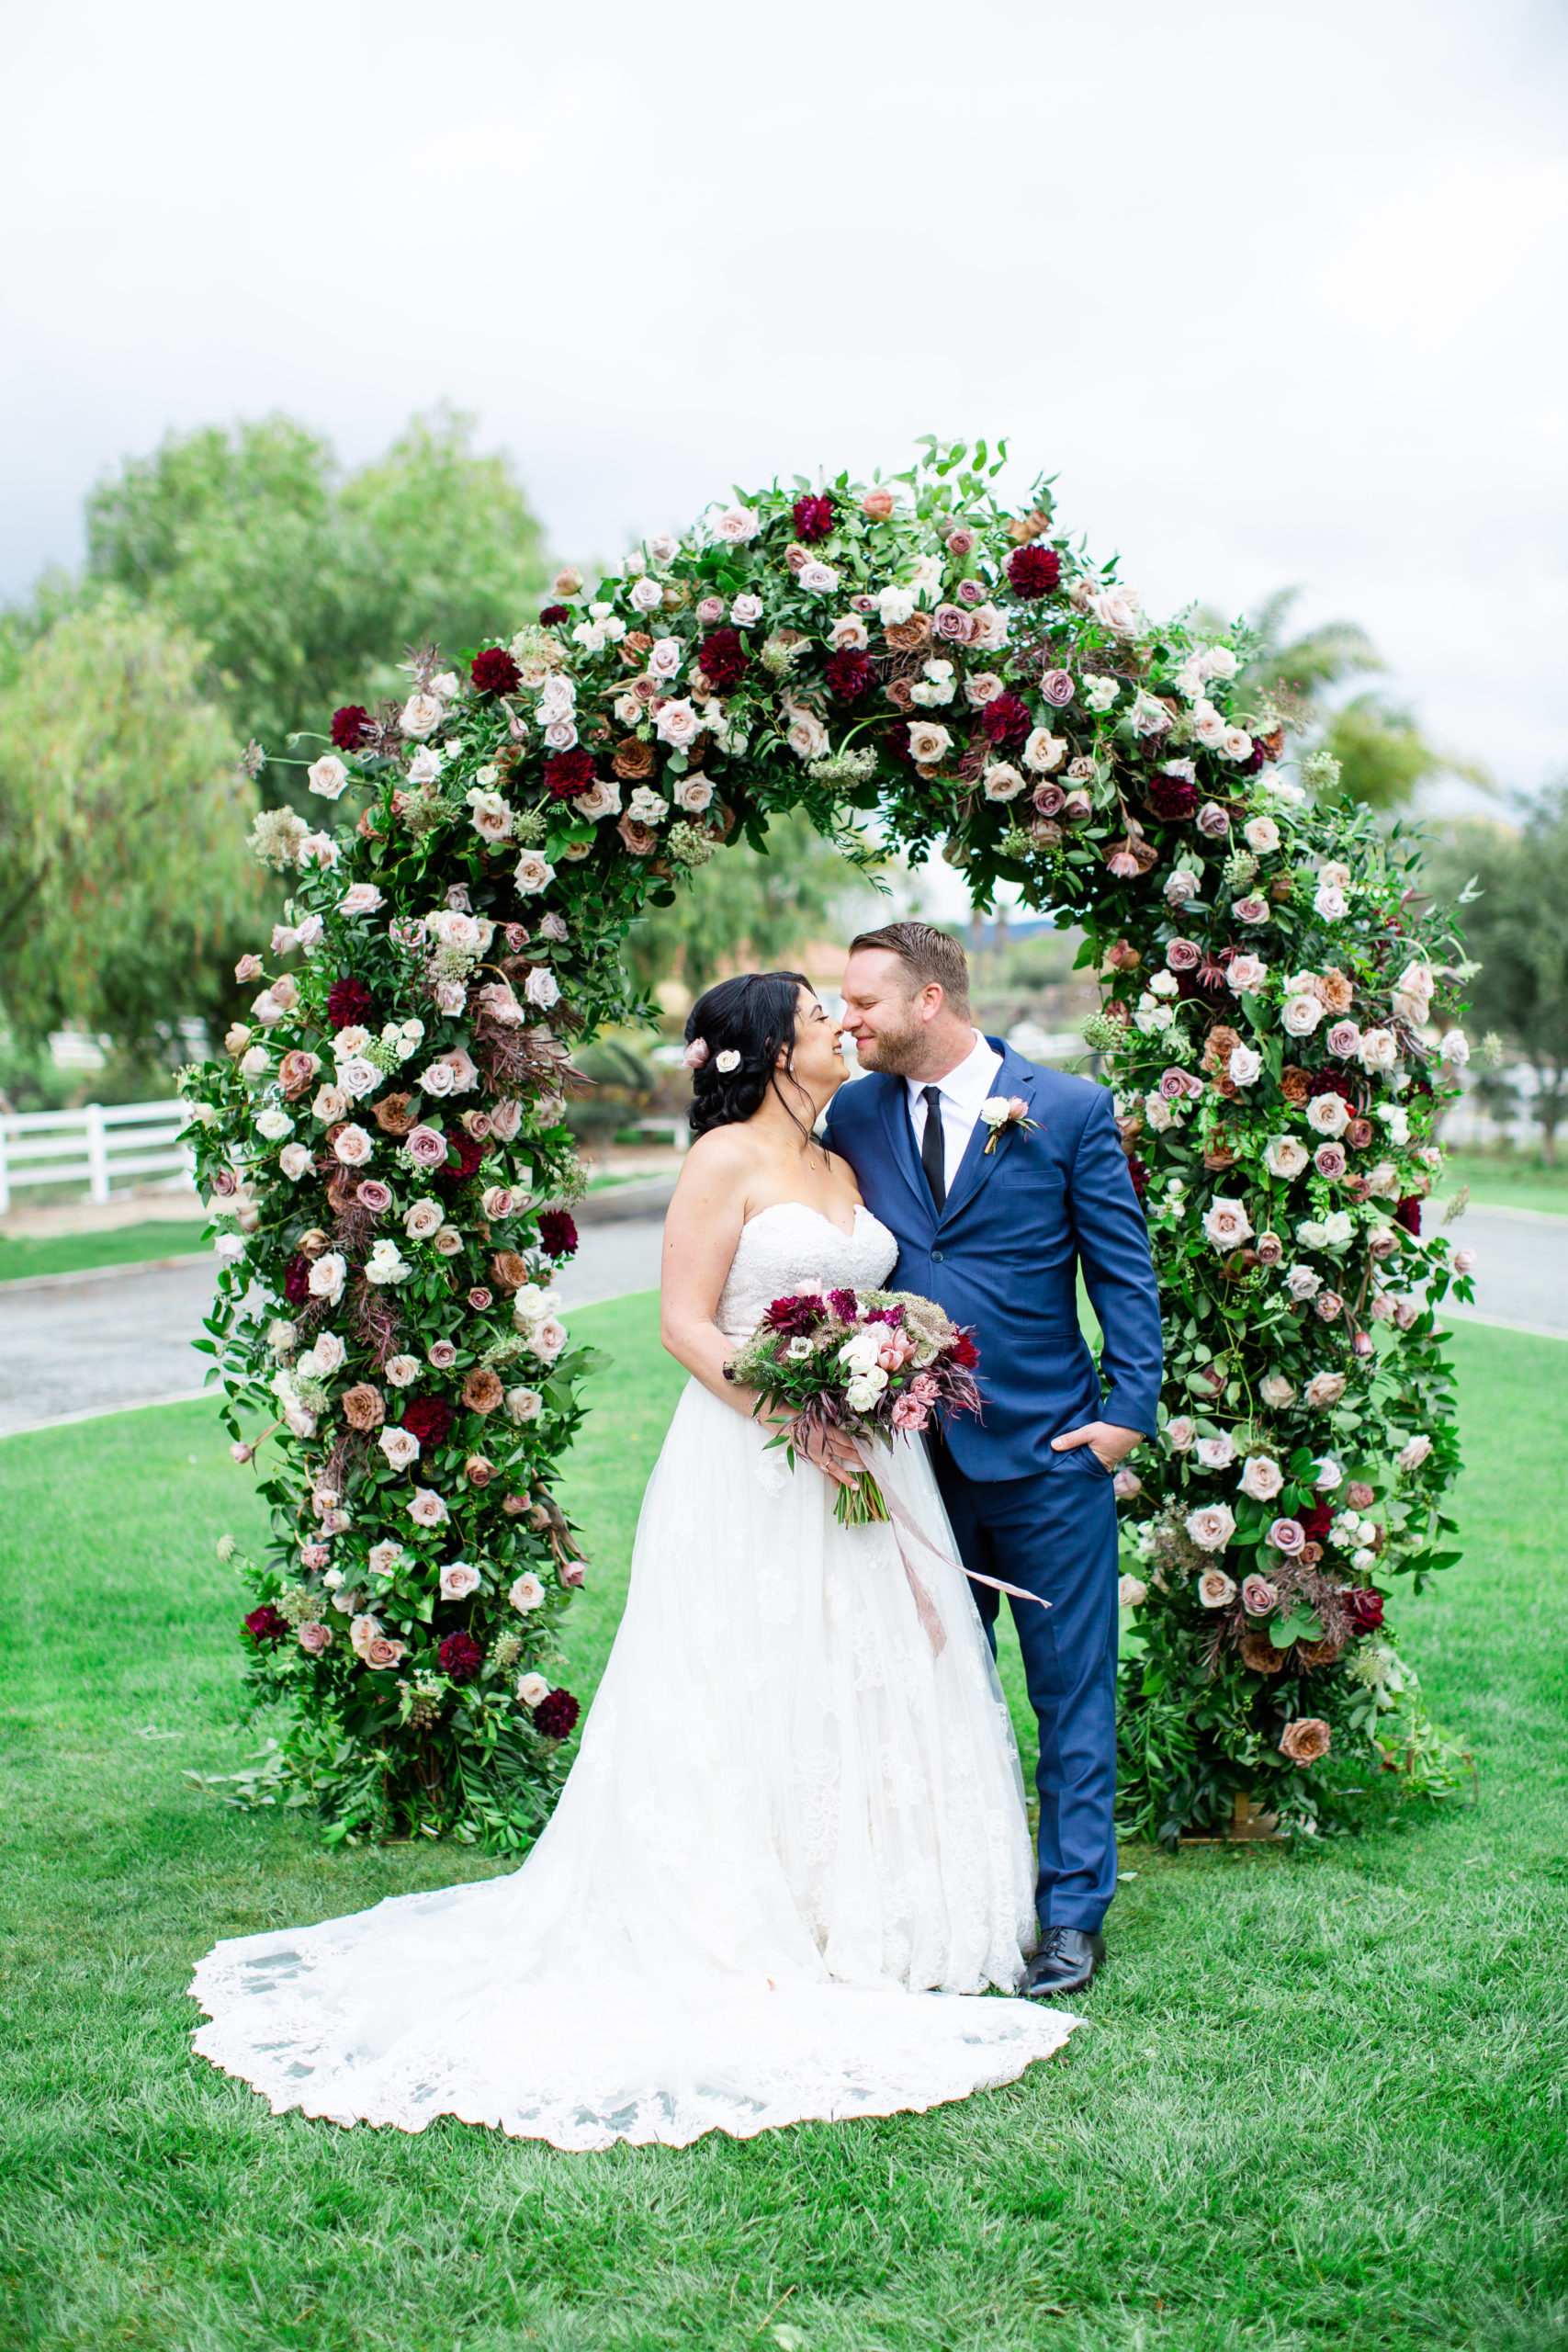 Bride and Groom under a beautiful flowered wedding arch designed by Little Hill Designs